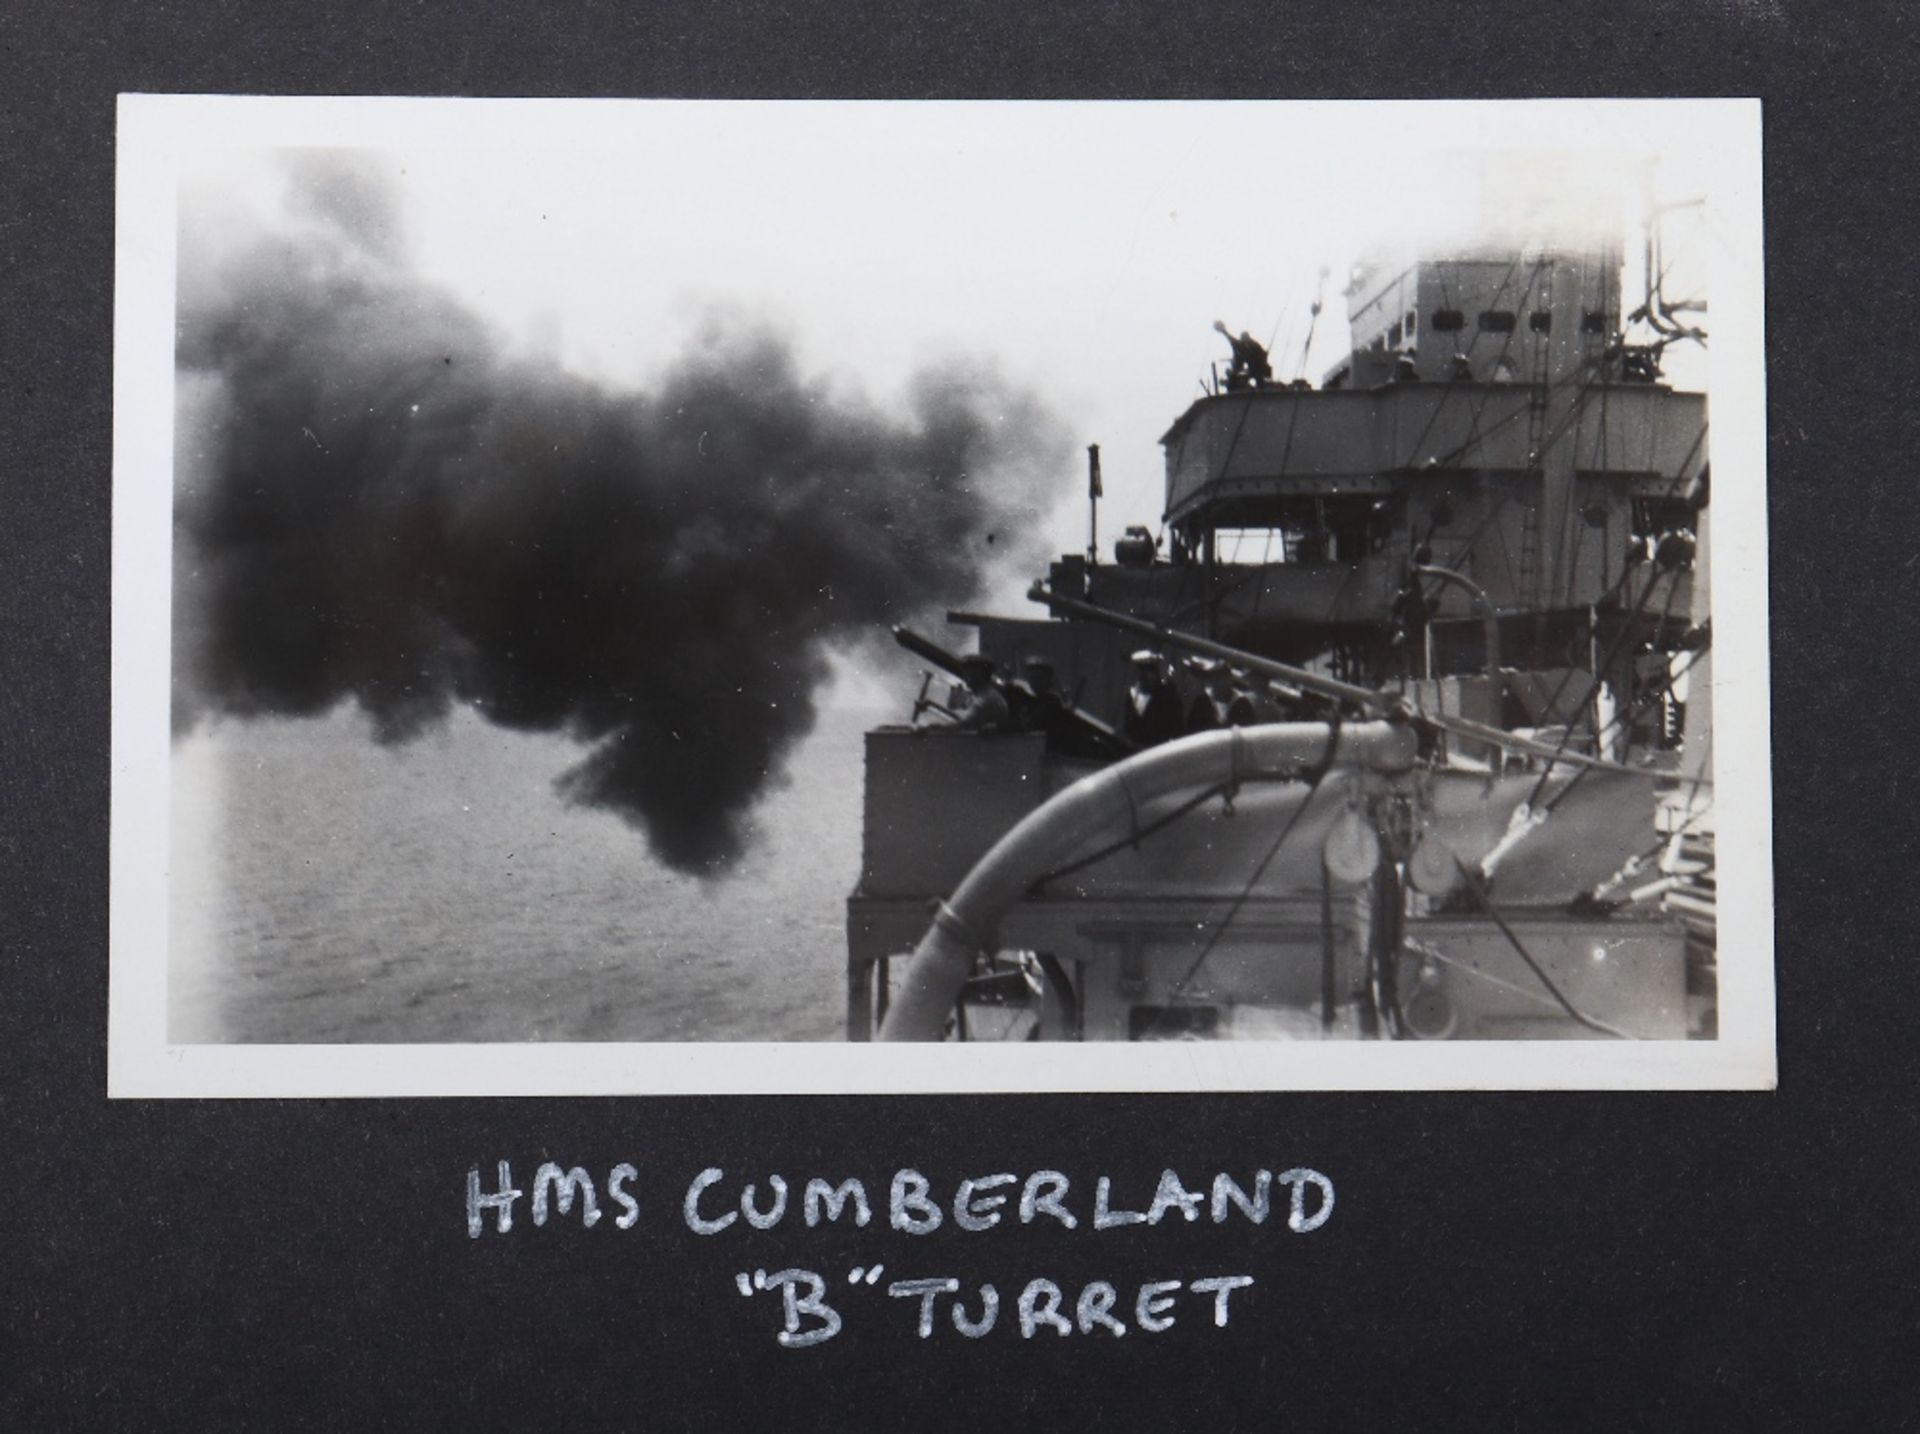 Chinese Lacquered Photograph Album Covering Cruise of HMS Cumberland (5th Cruiser Squadron China) 19 - Image 17 of 23